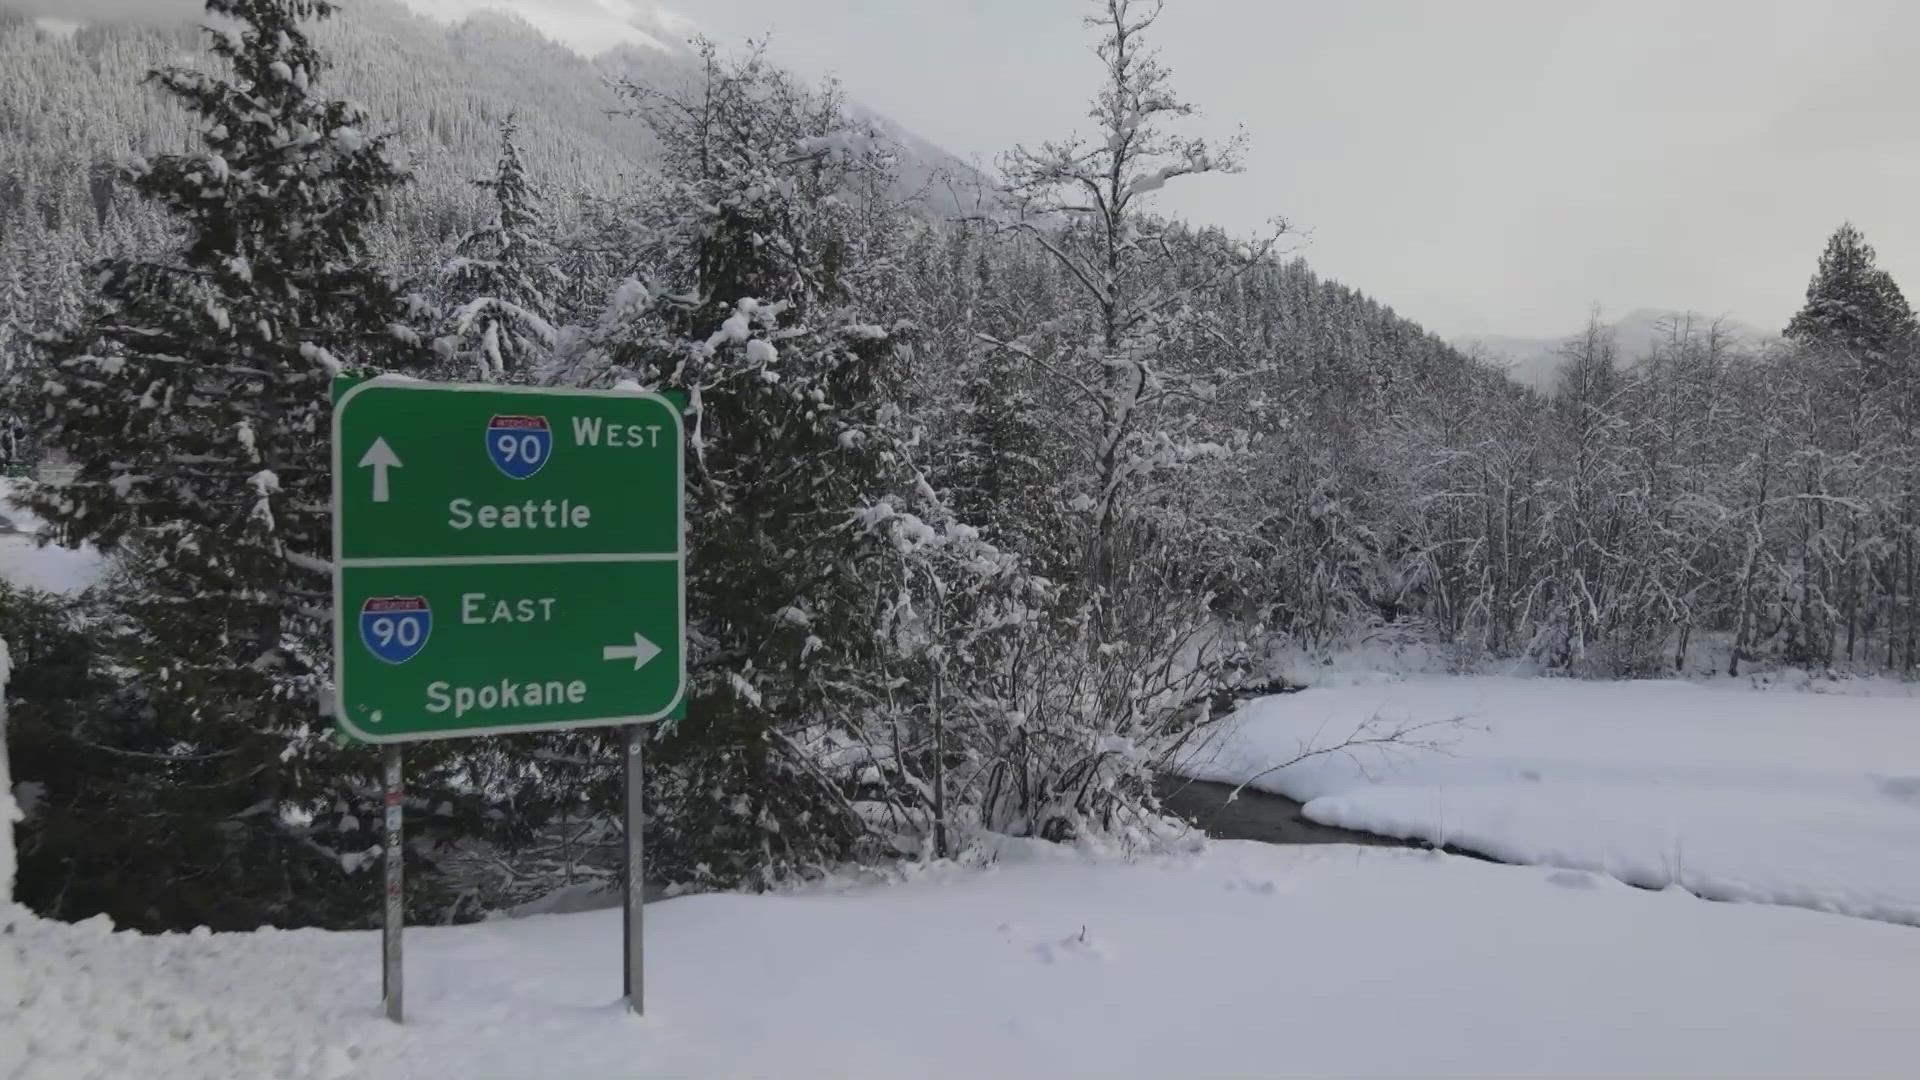 Fly over a snow-covered Snoqualmie Pass.